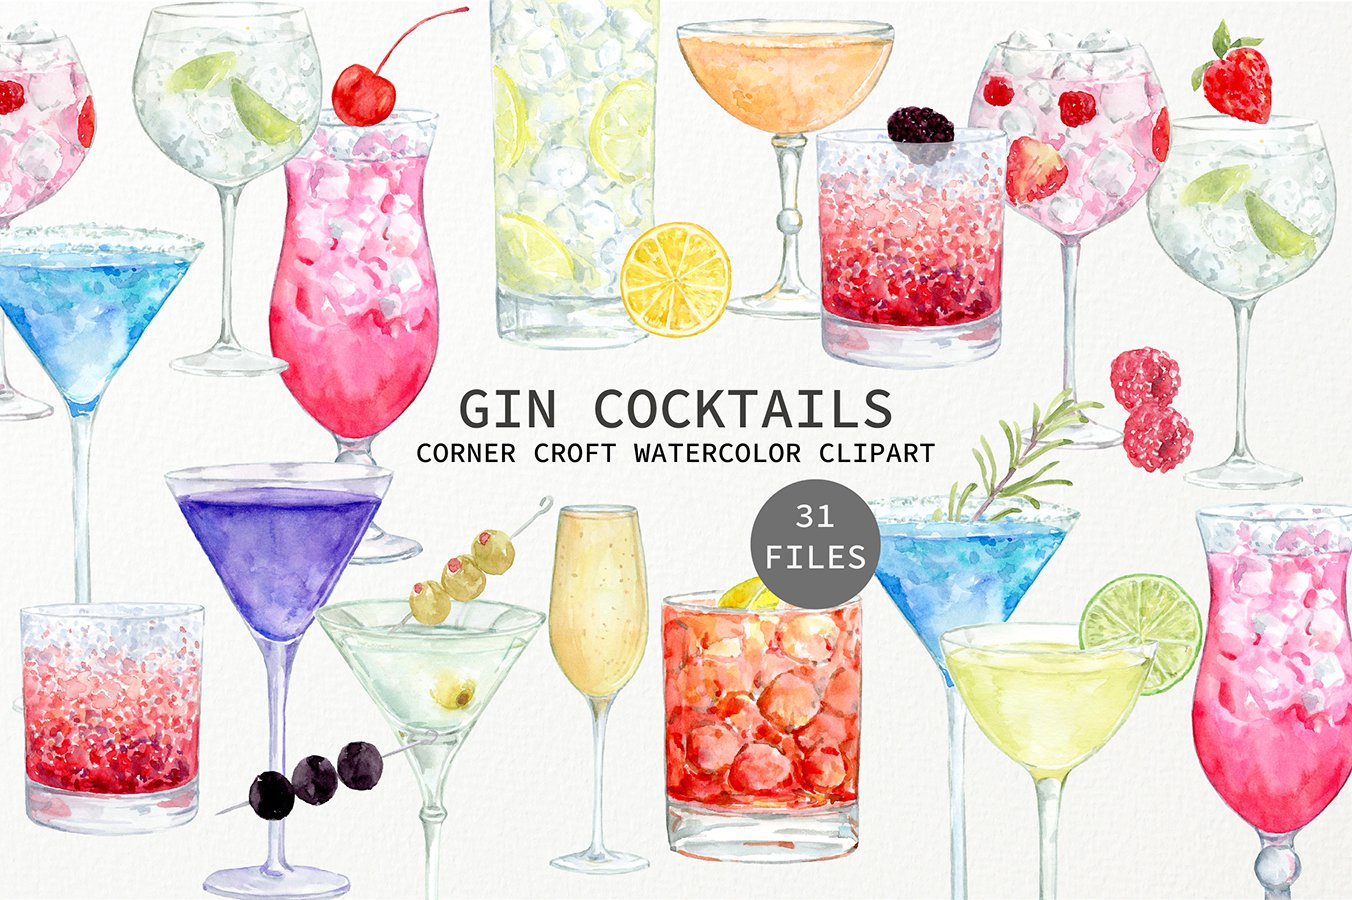 Watercolor gin cocktail.